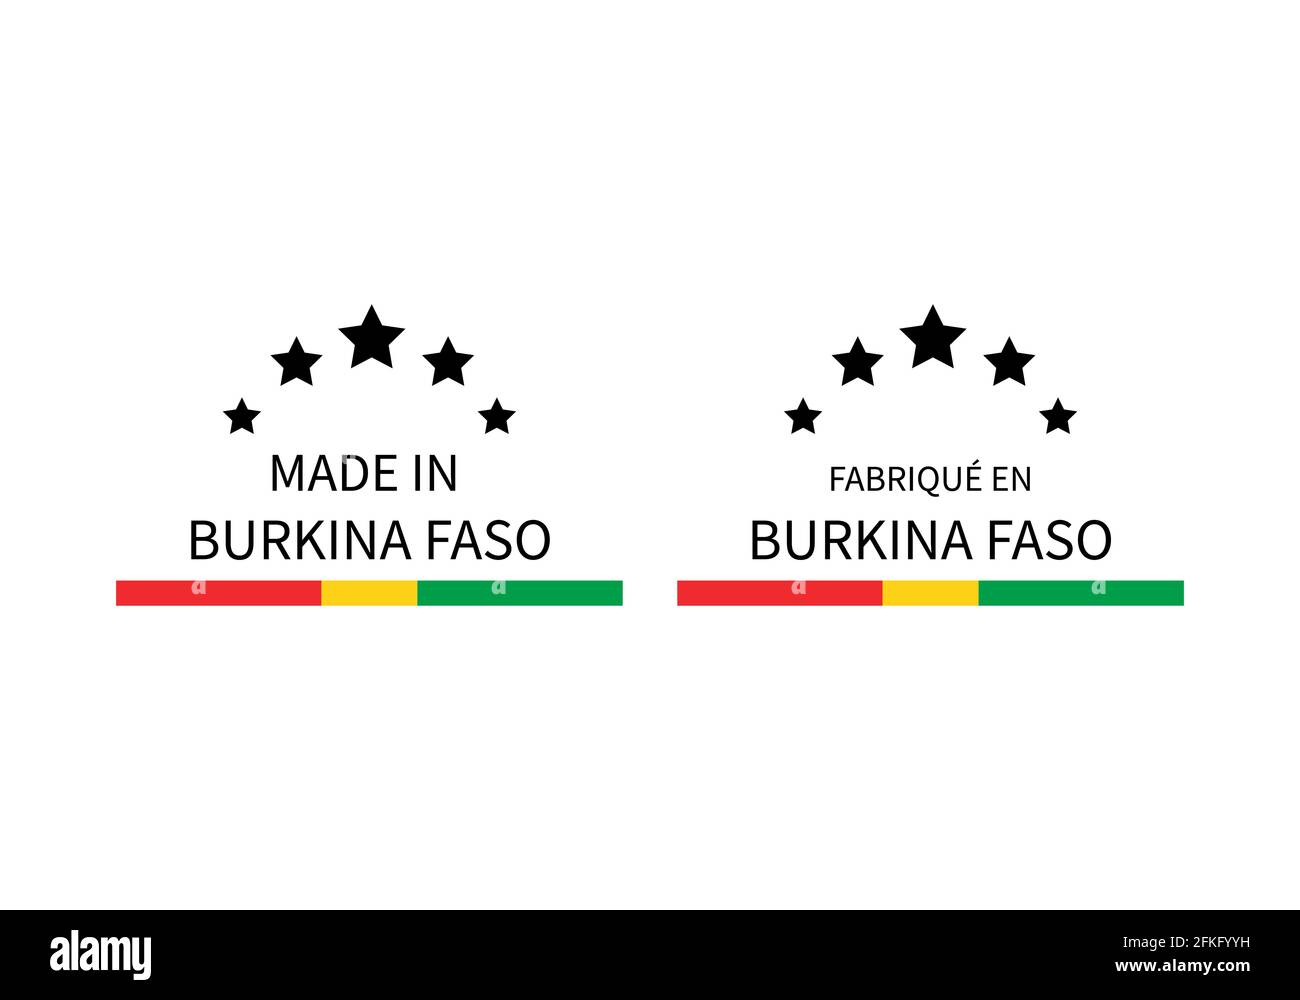 Made in Burkina Faso labels in English and in French languages